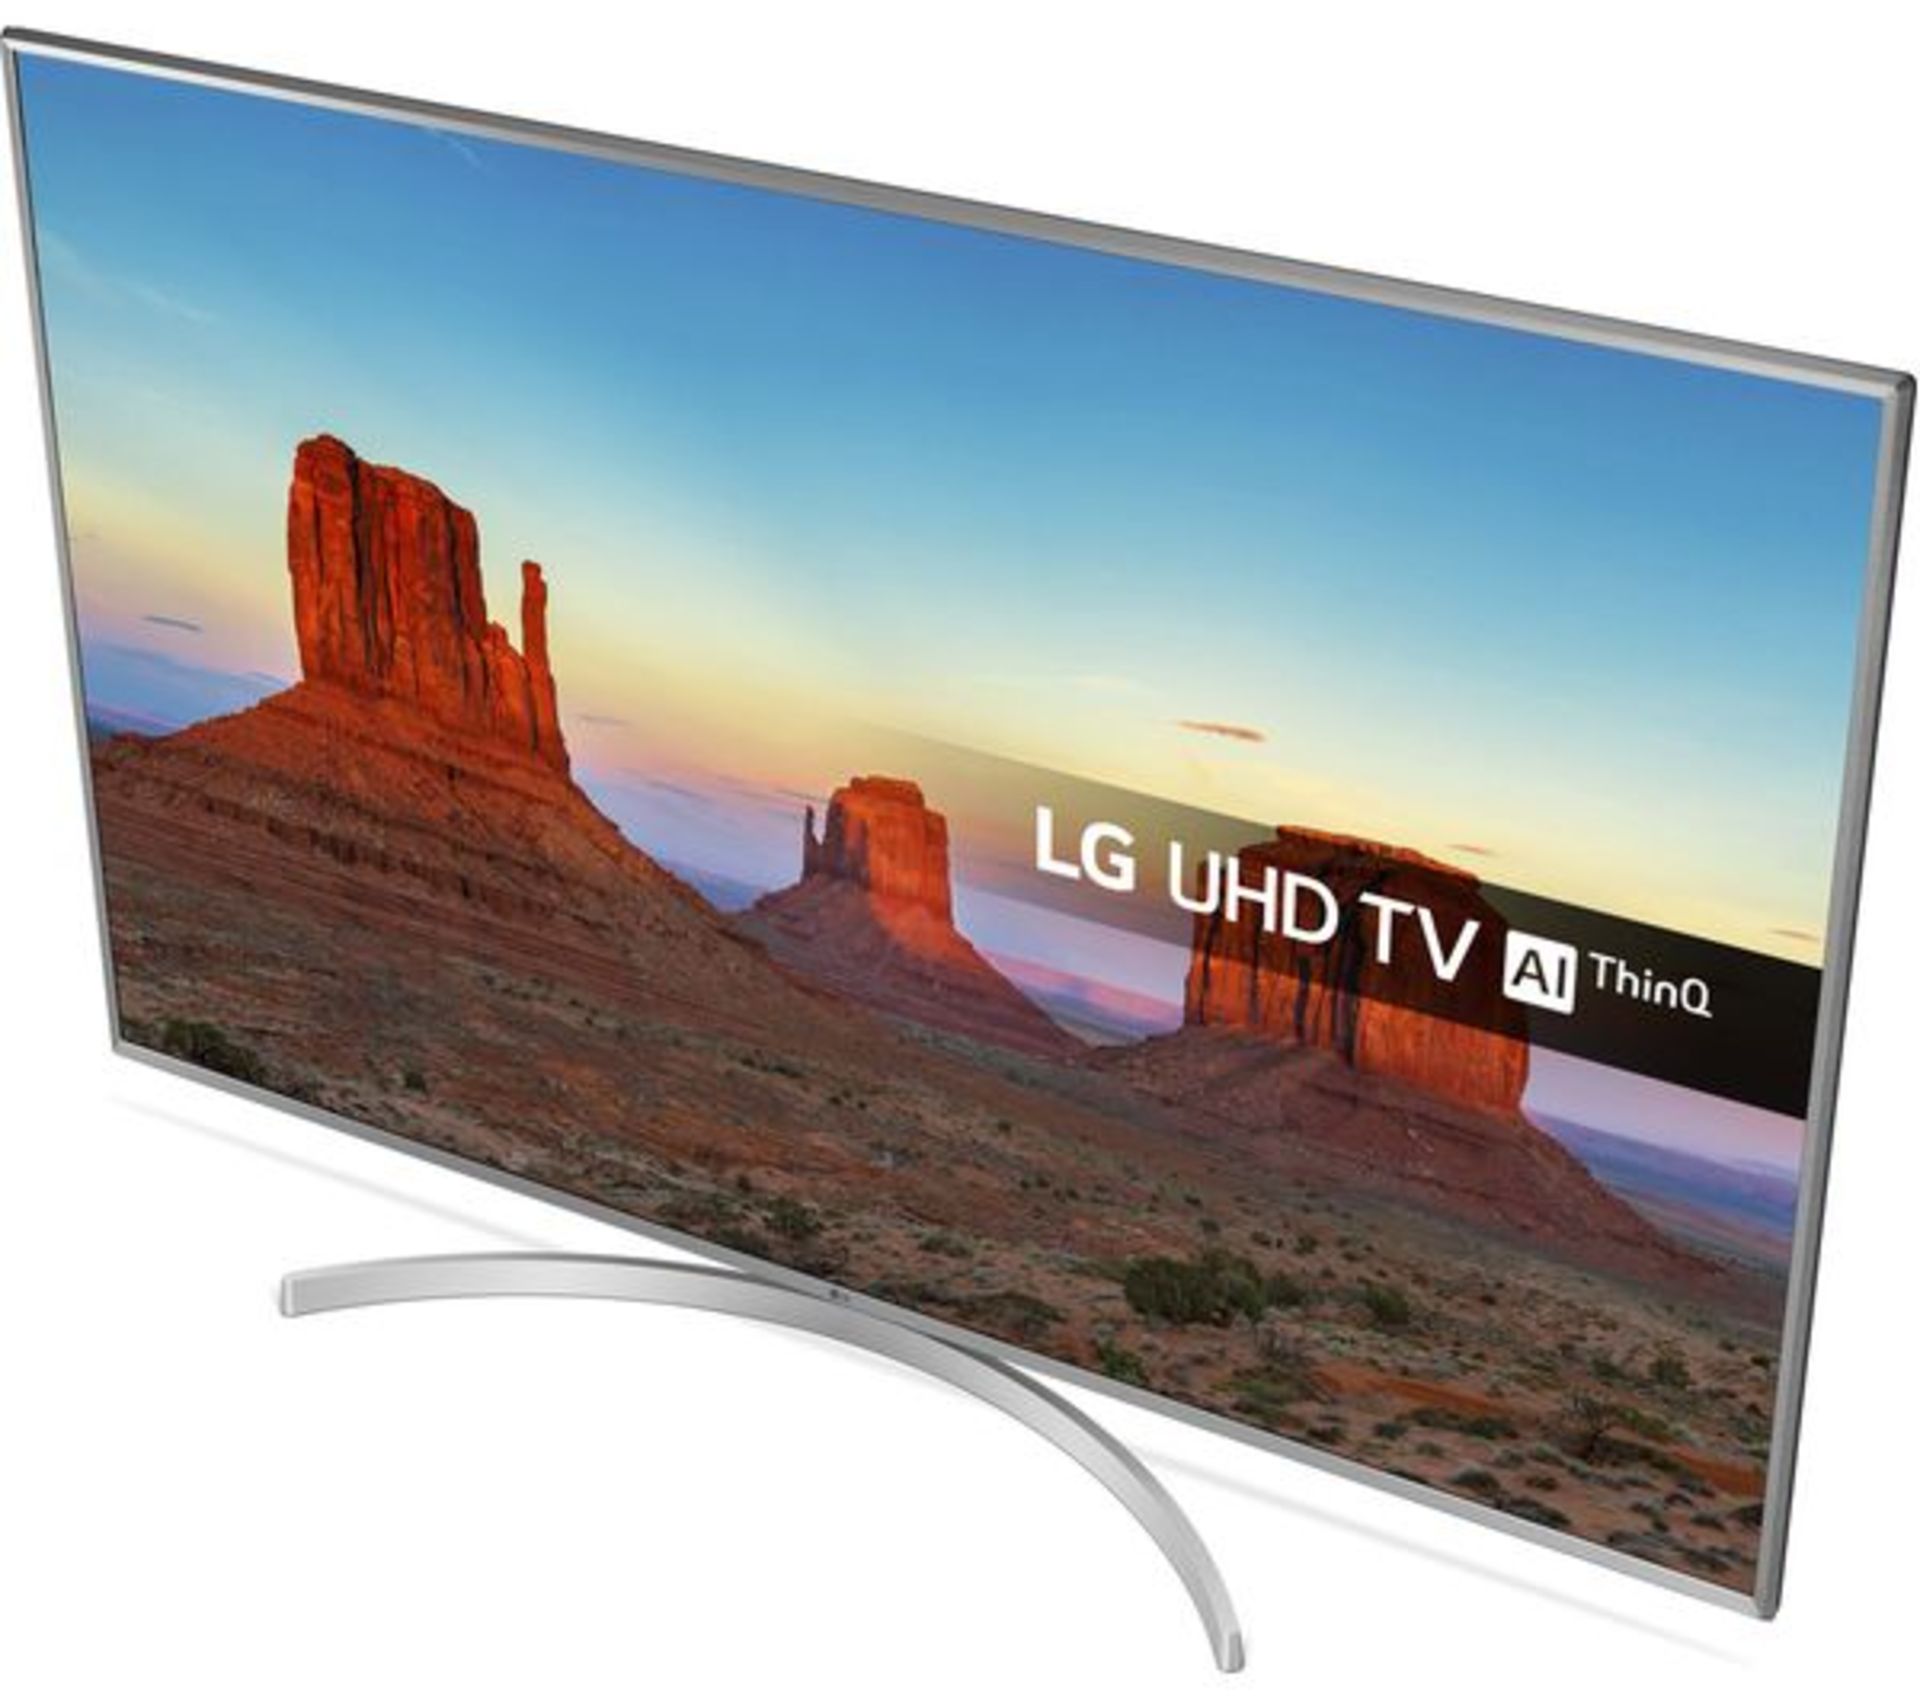 V Grade A LG 65 inch ACTIVE HDR 4K ULTRA HD LED SMART TV WITH FREEVIEW HD & WEBOS & WIFI - AI TV